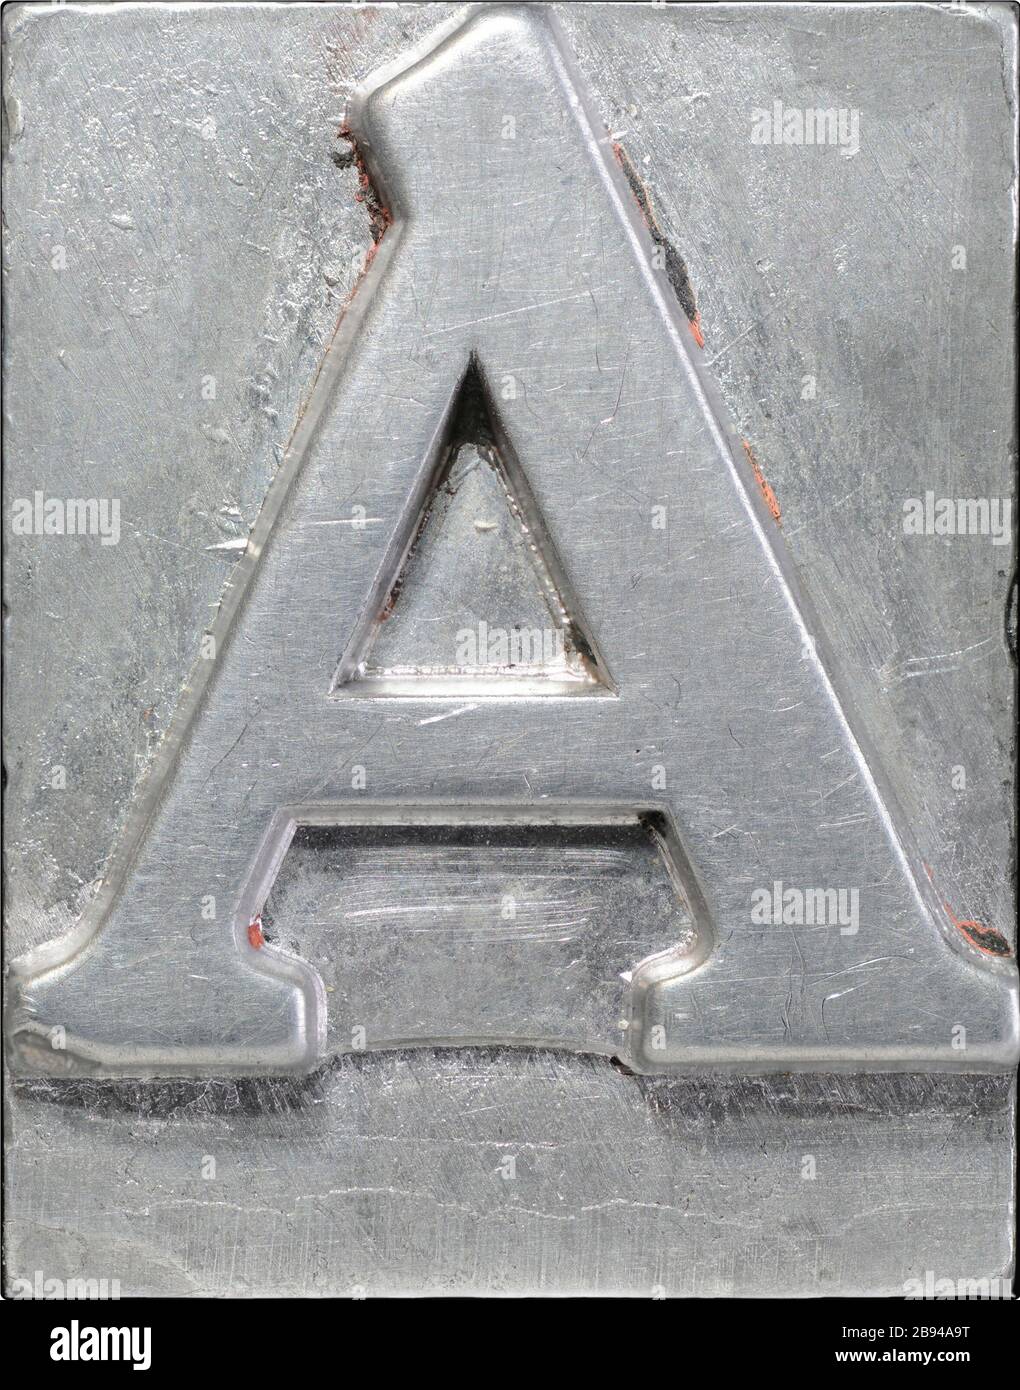 isolated capital letter A from vintage metallic letterpress set Stock Photo